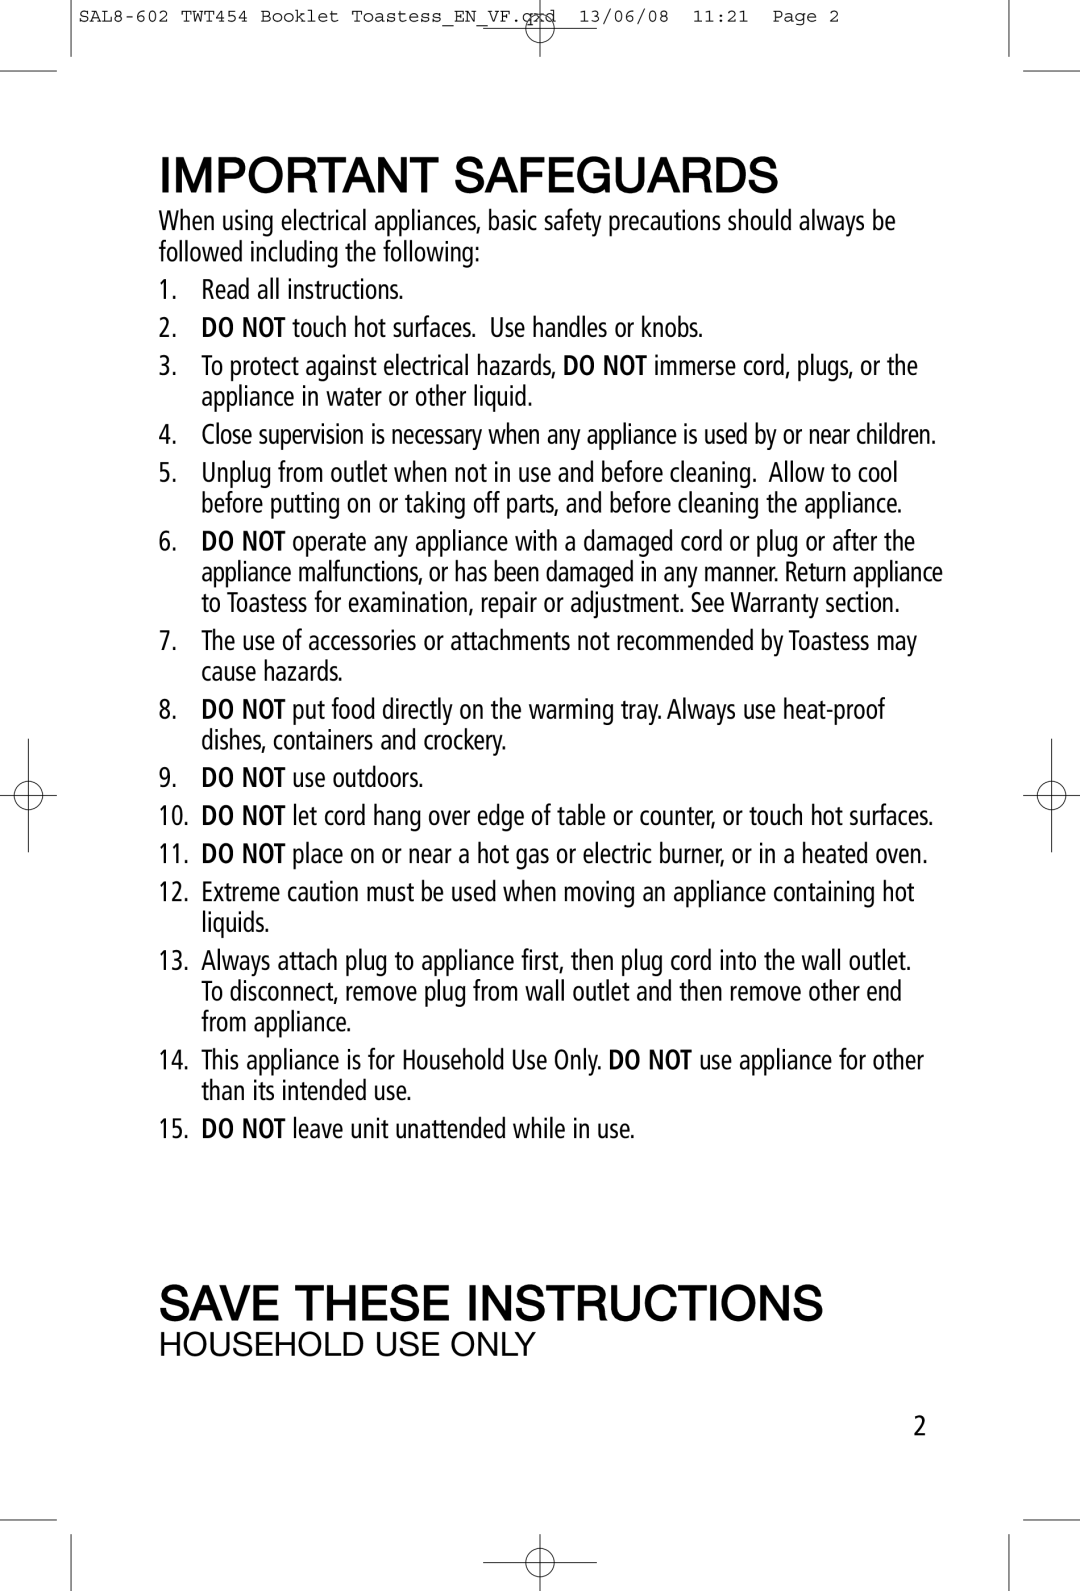 Toastess TWT20 manual Household Use Only, Important Safeguards, Save These Instructions 